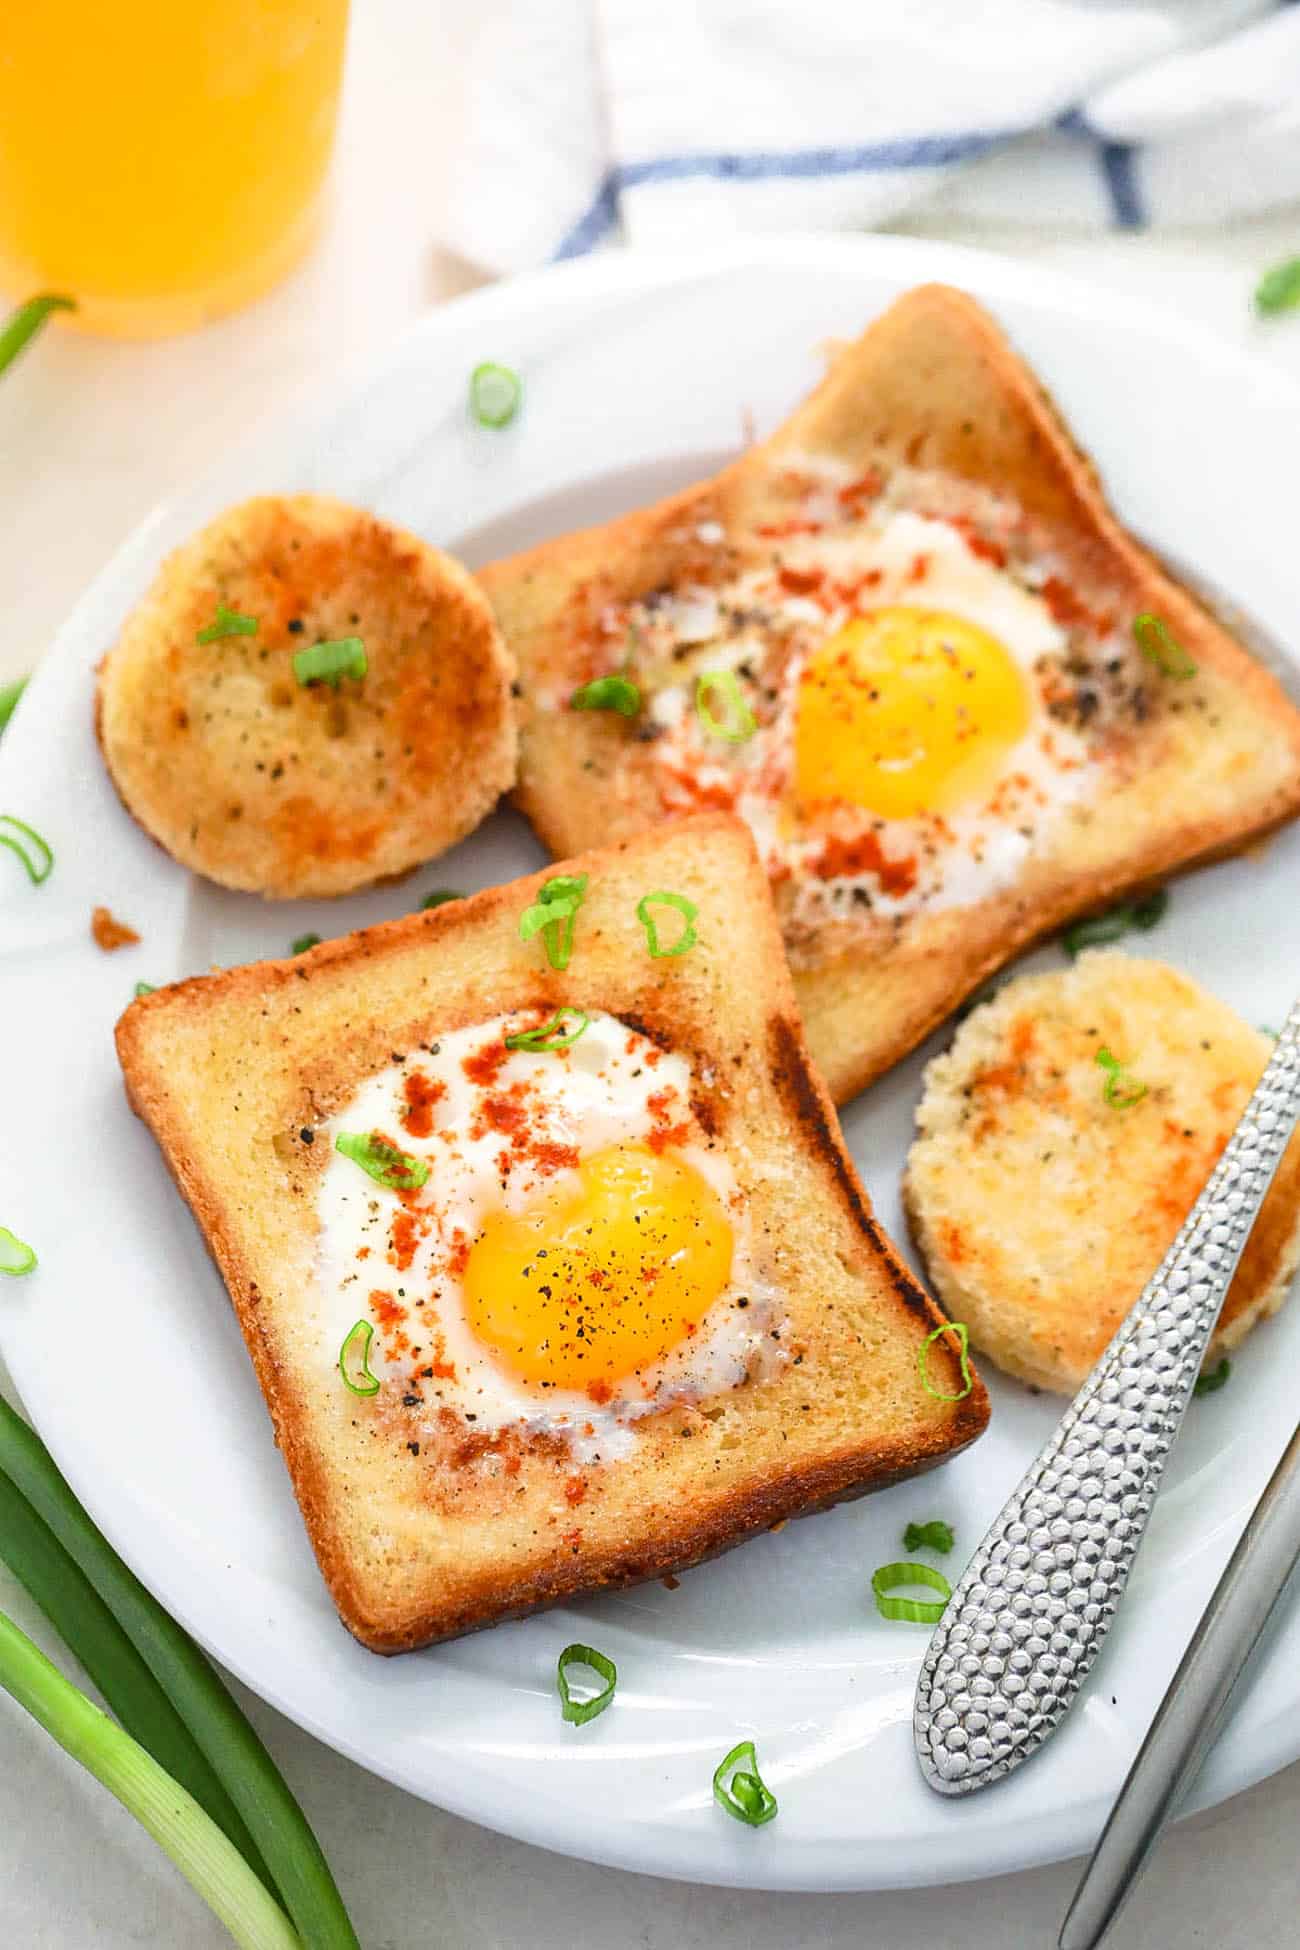 Eggs In A Basket: How To Make This Breakfast Recipe